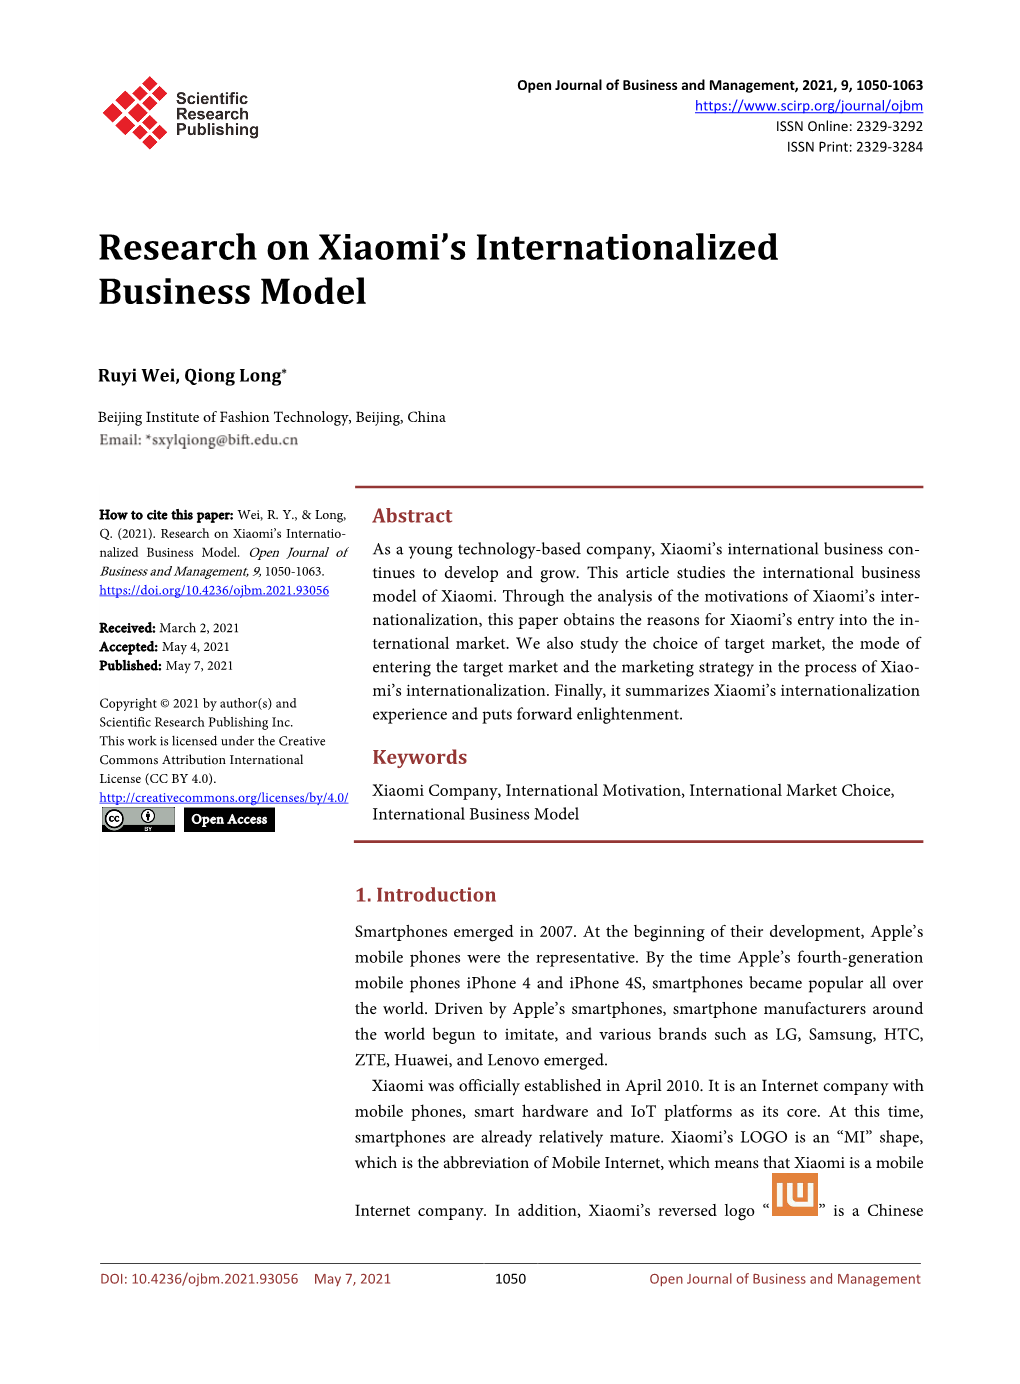 Research on Xiaomi's Internationalized Business Model